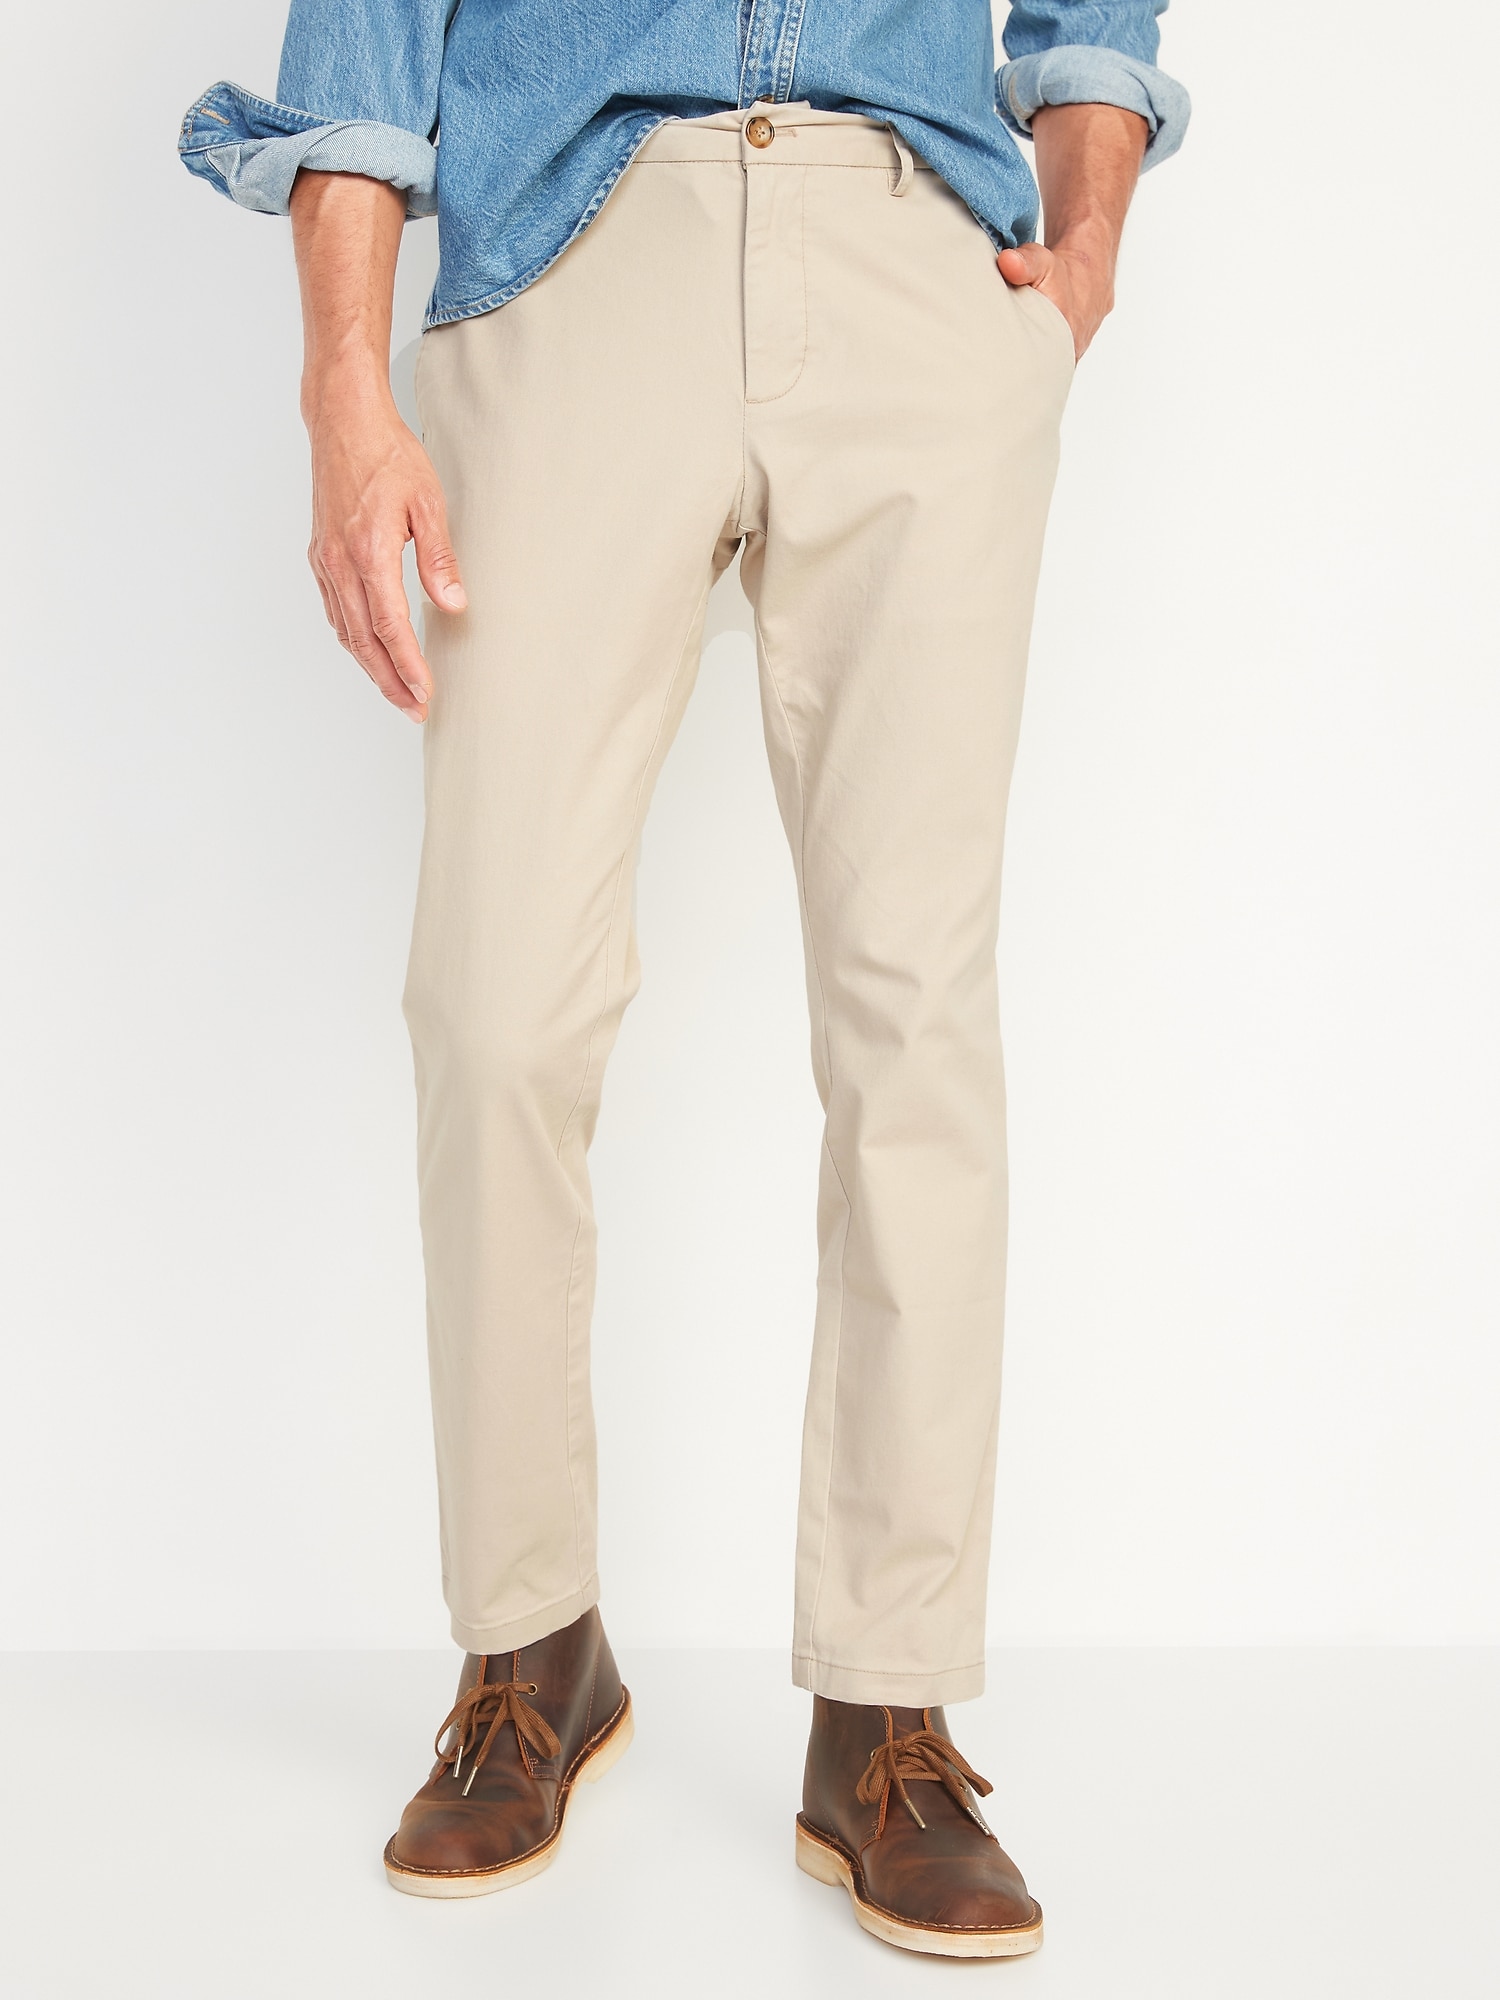 Athletic Built-In Flex Rotation Chino Pants | Old Navy